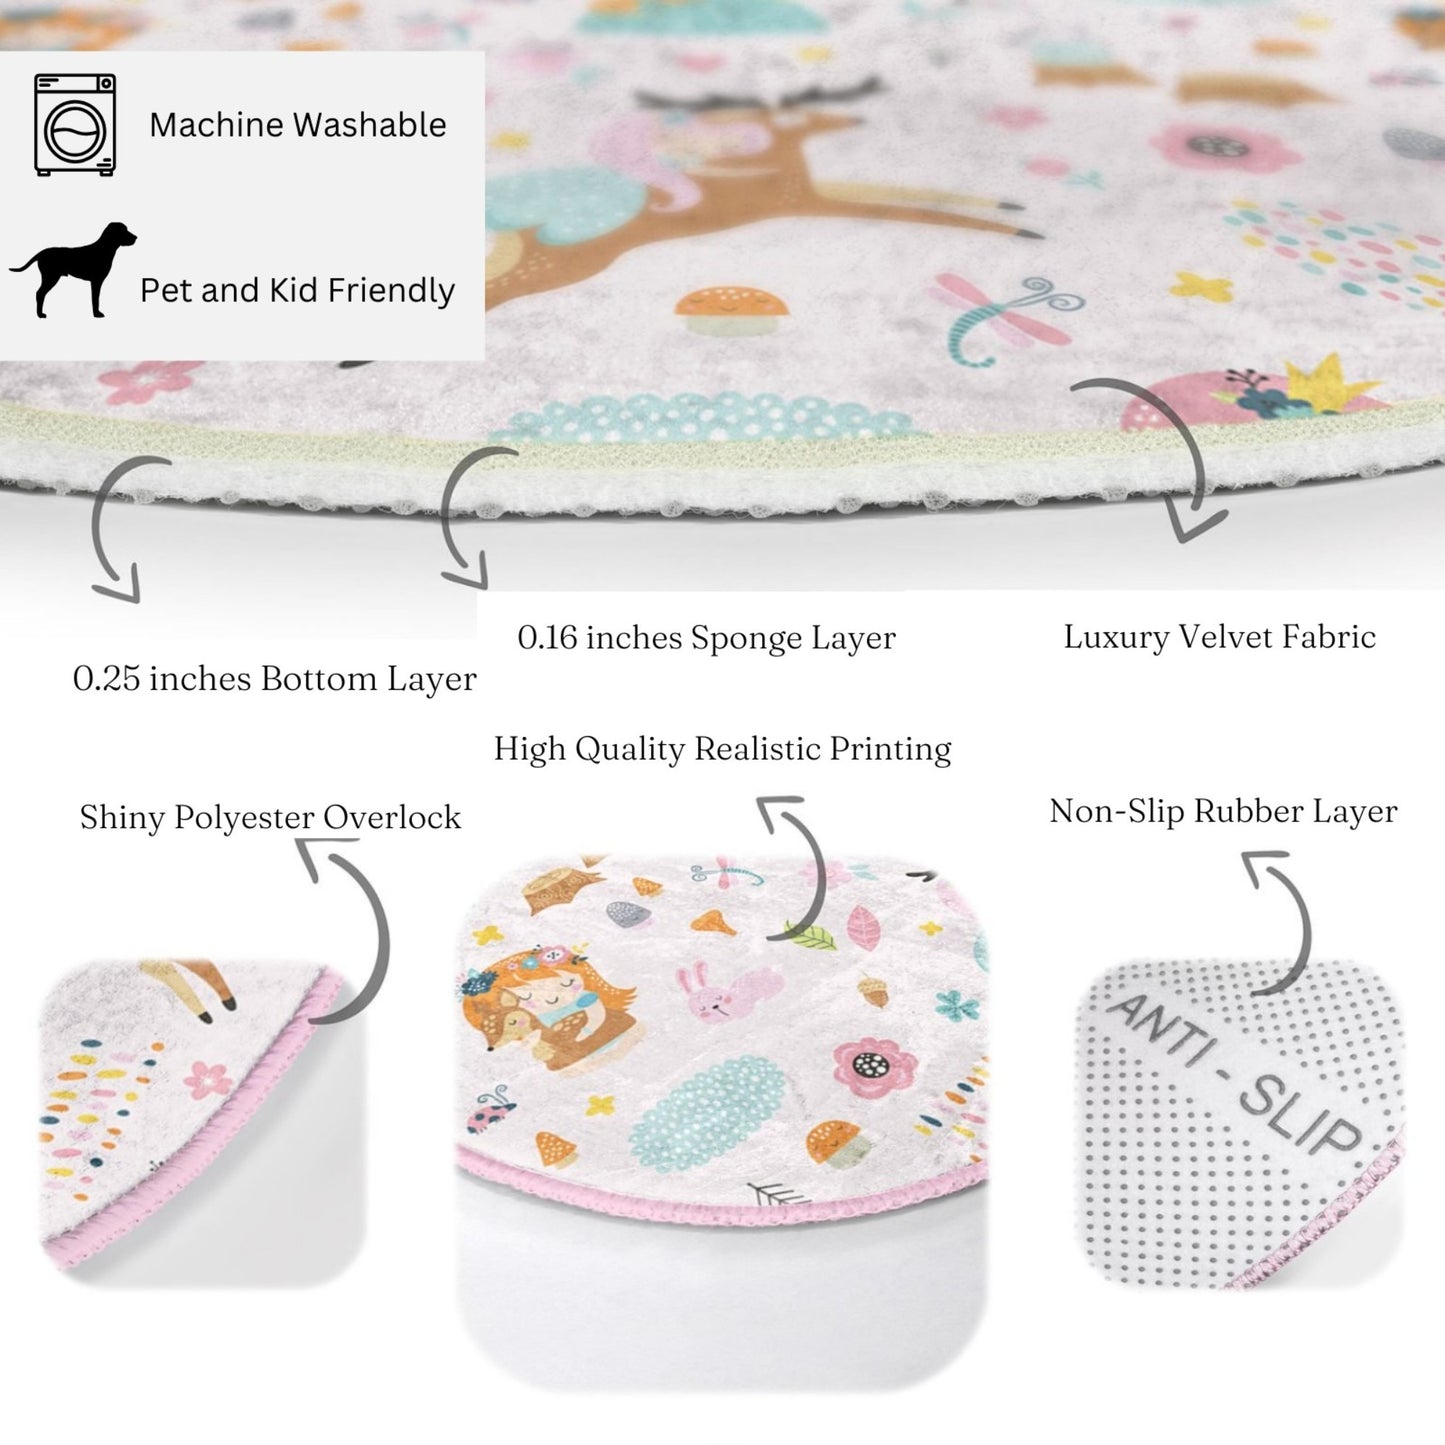 Easy-to-Clean Princess and Animal Patterned Rug